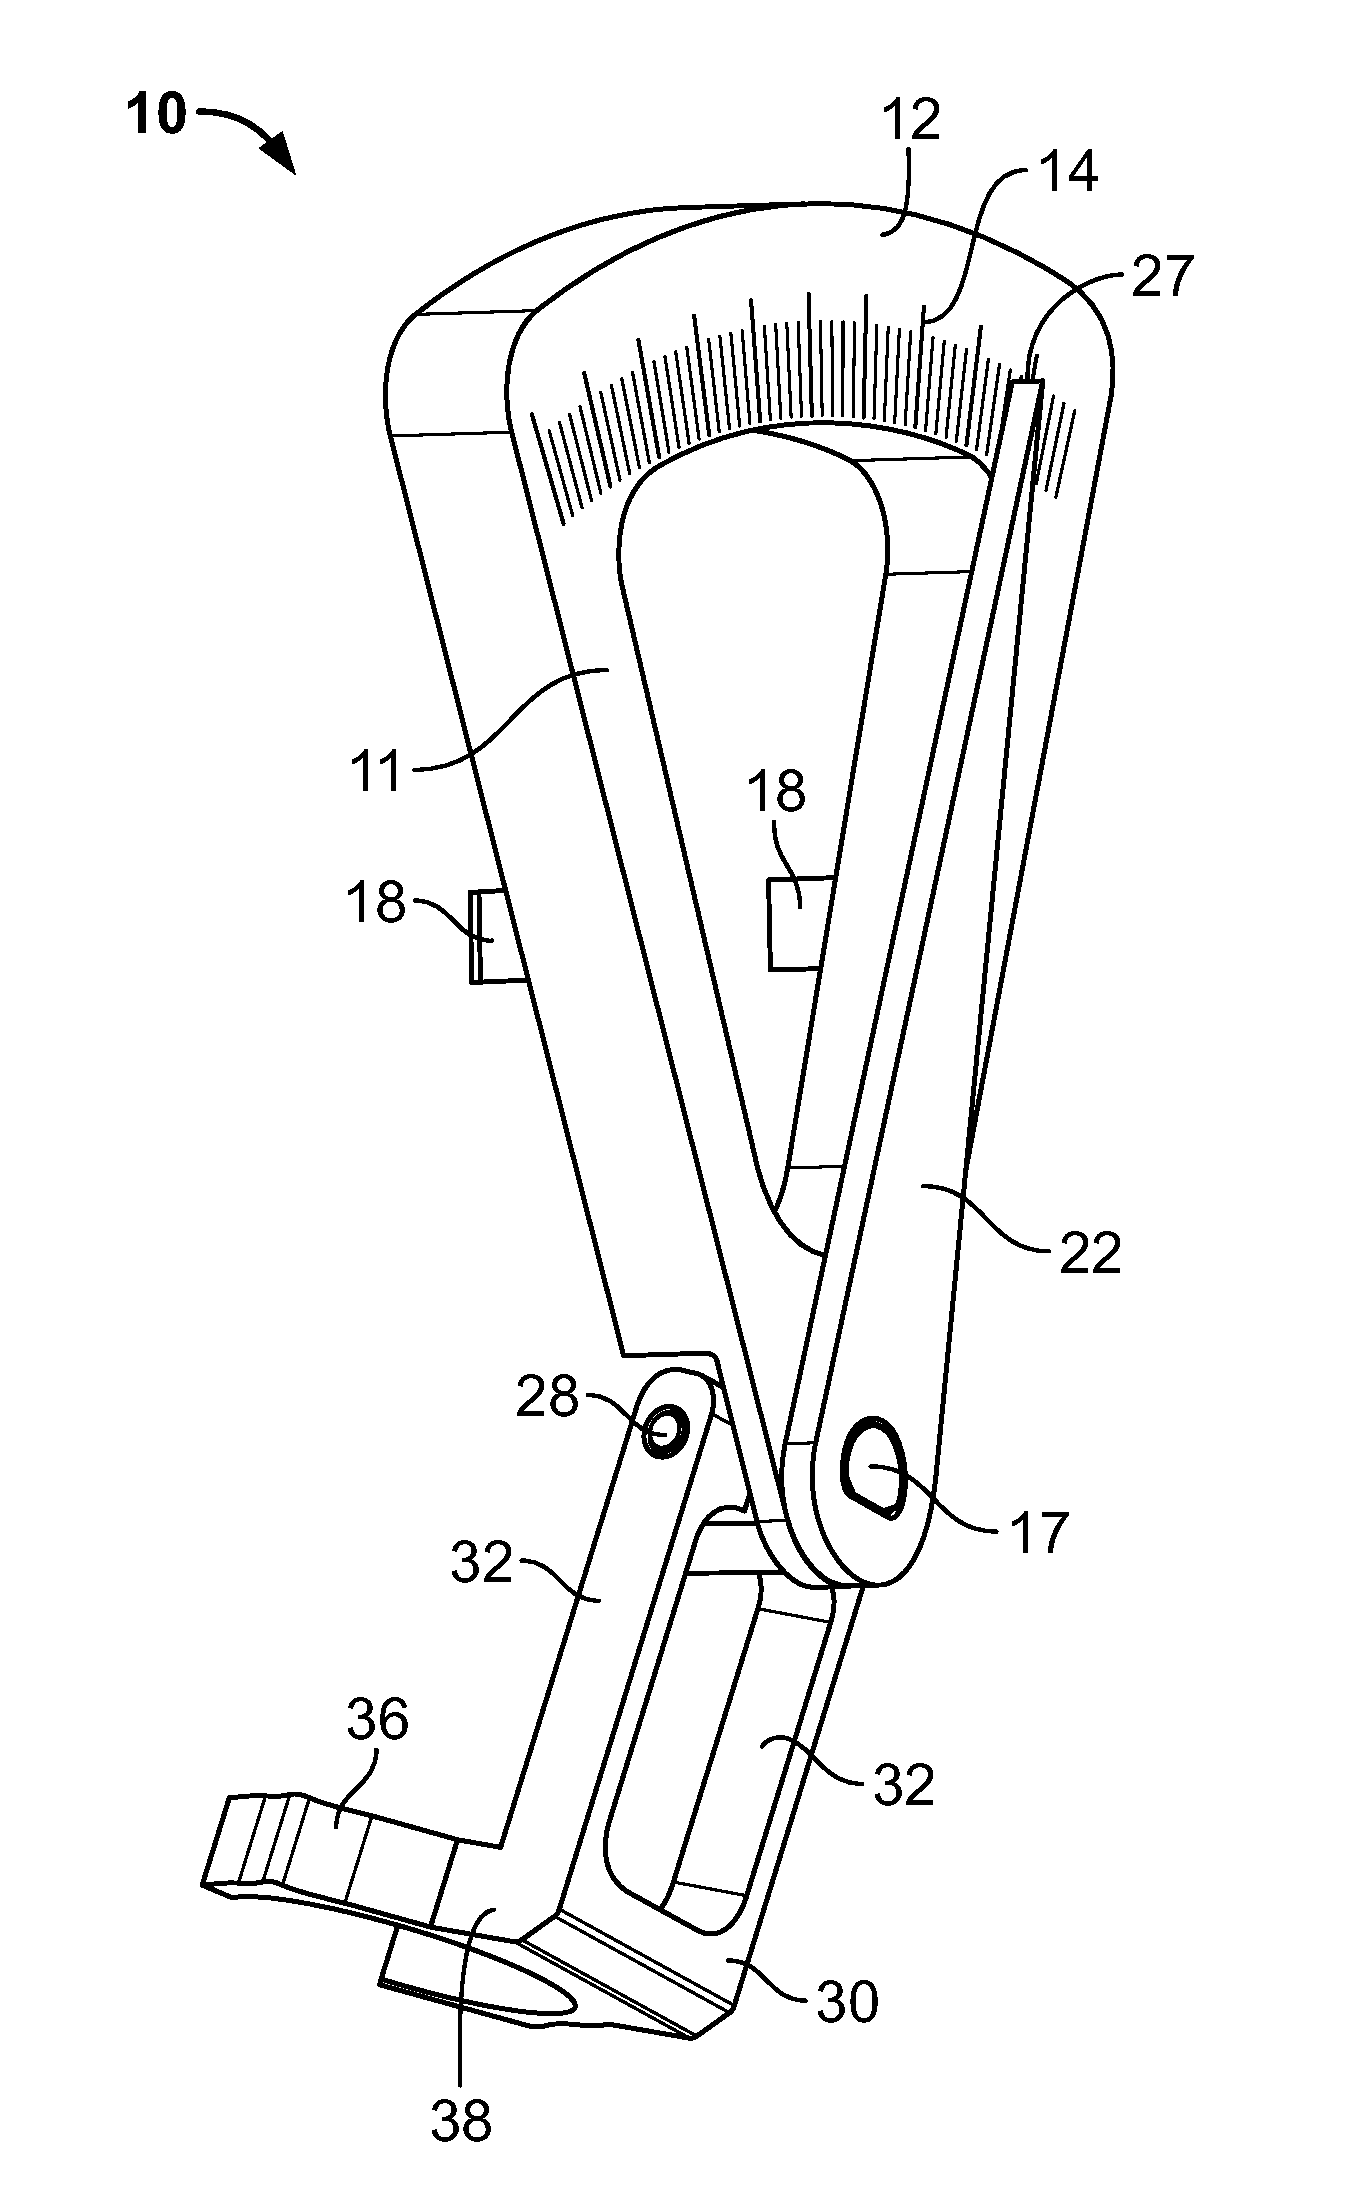 Measurement device for external fixation frame